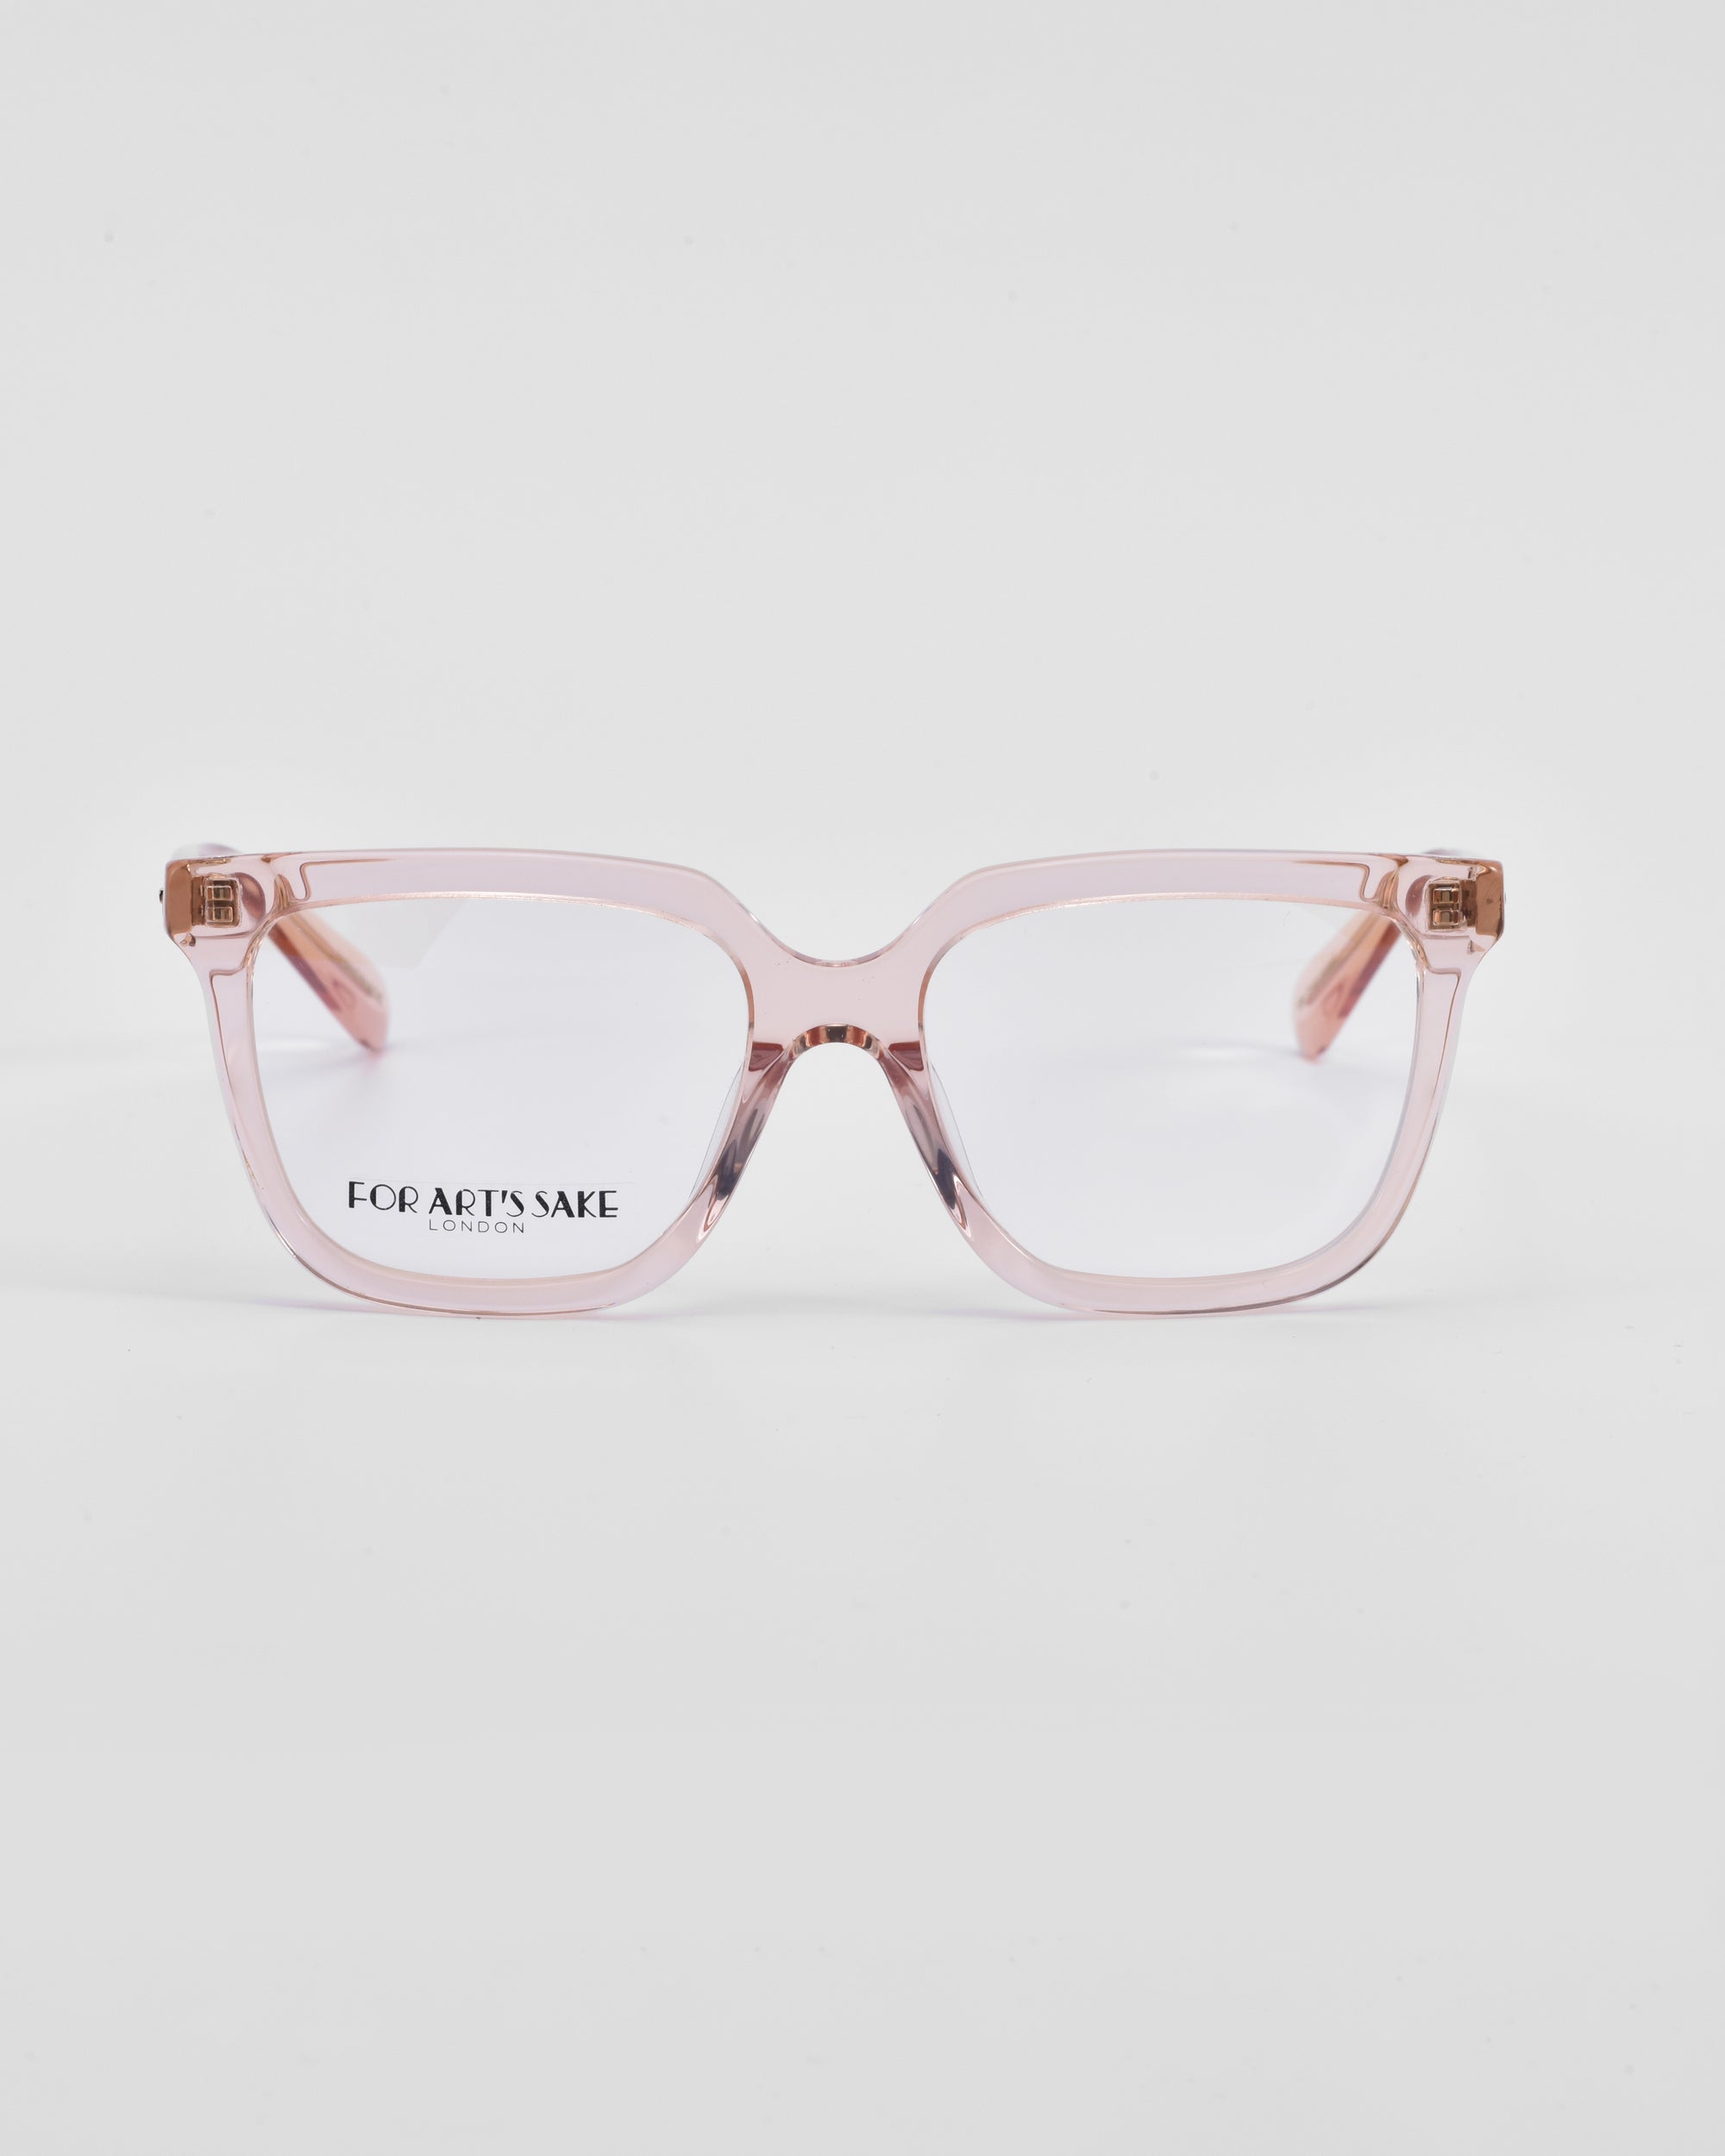 A pair of pink, square-framed eyeglasses with clear lenses and a classic square silhouette. The brand name &quot;For Art&#39;s Sake®&quot; is visible on the left lens. The background is plain white. Product Name: Nina